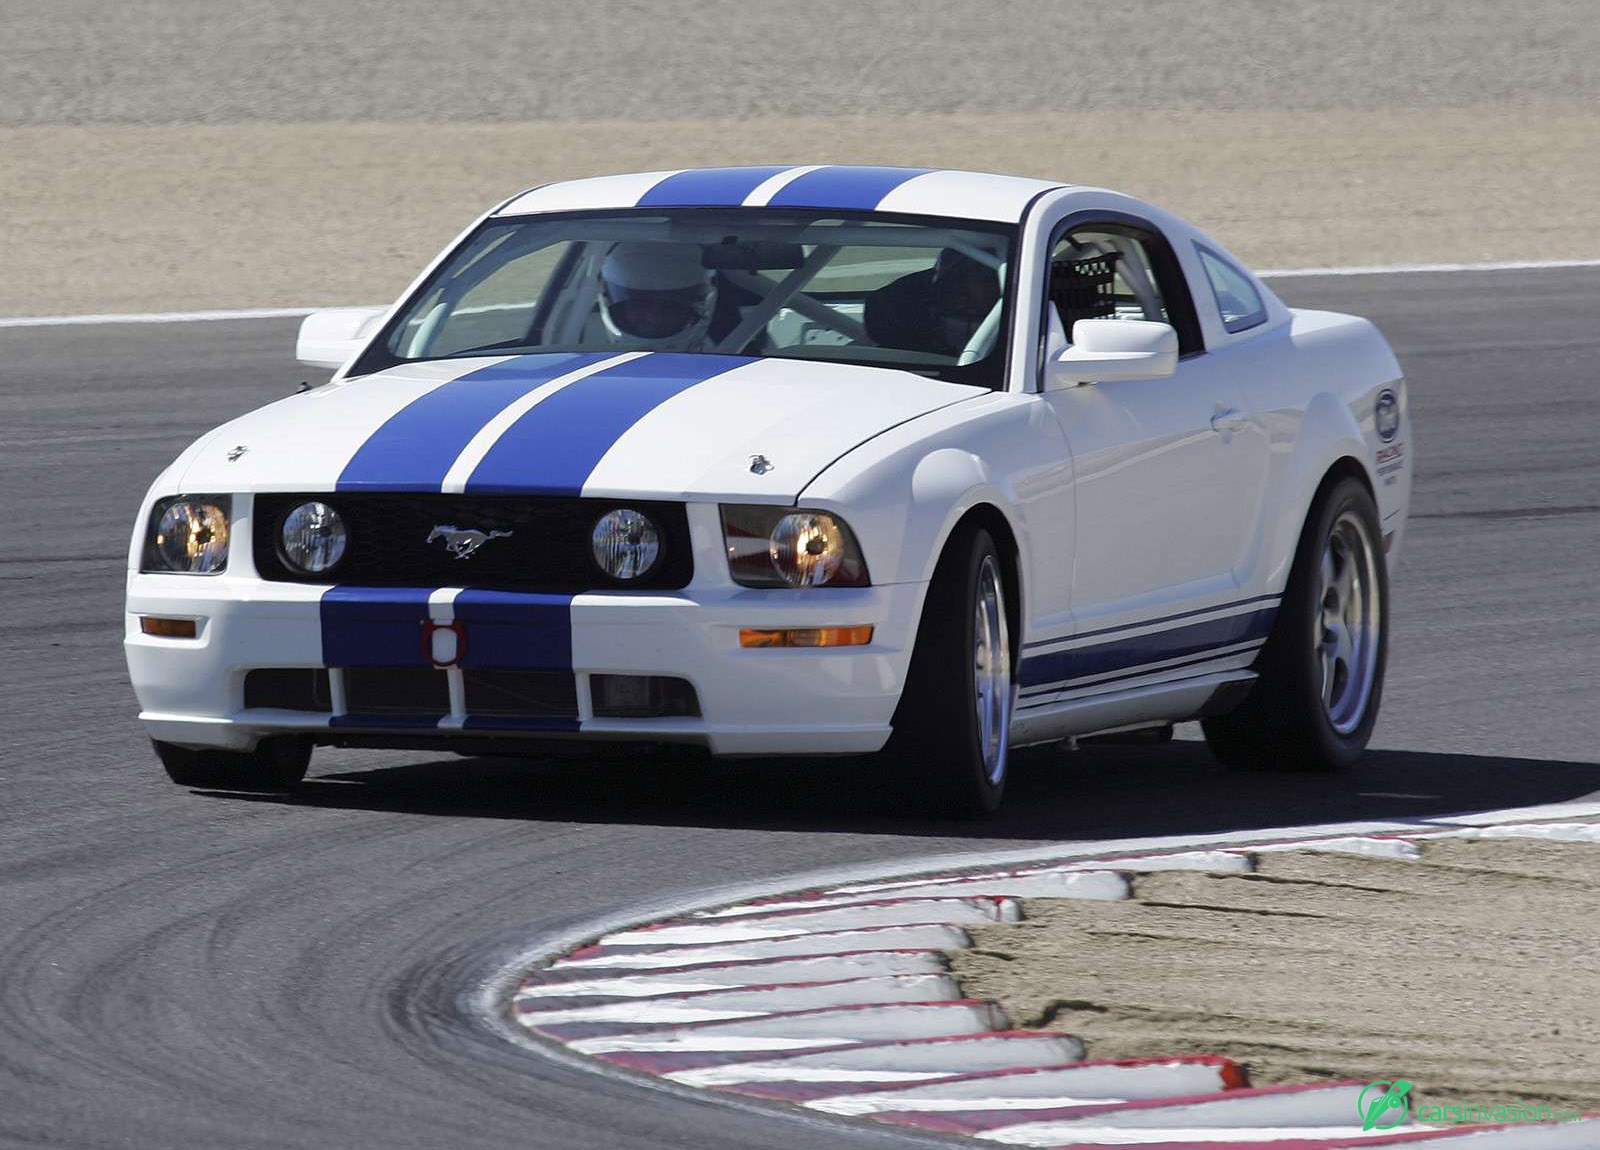 2005 Ford Mustang Racecar Prototype - HD Pictures @ carsinvasion.com